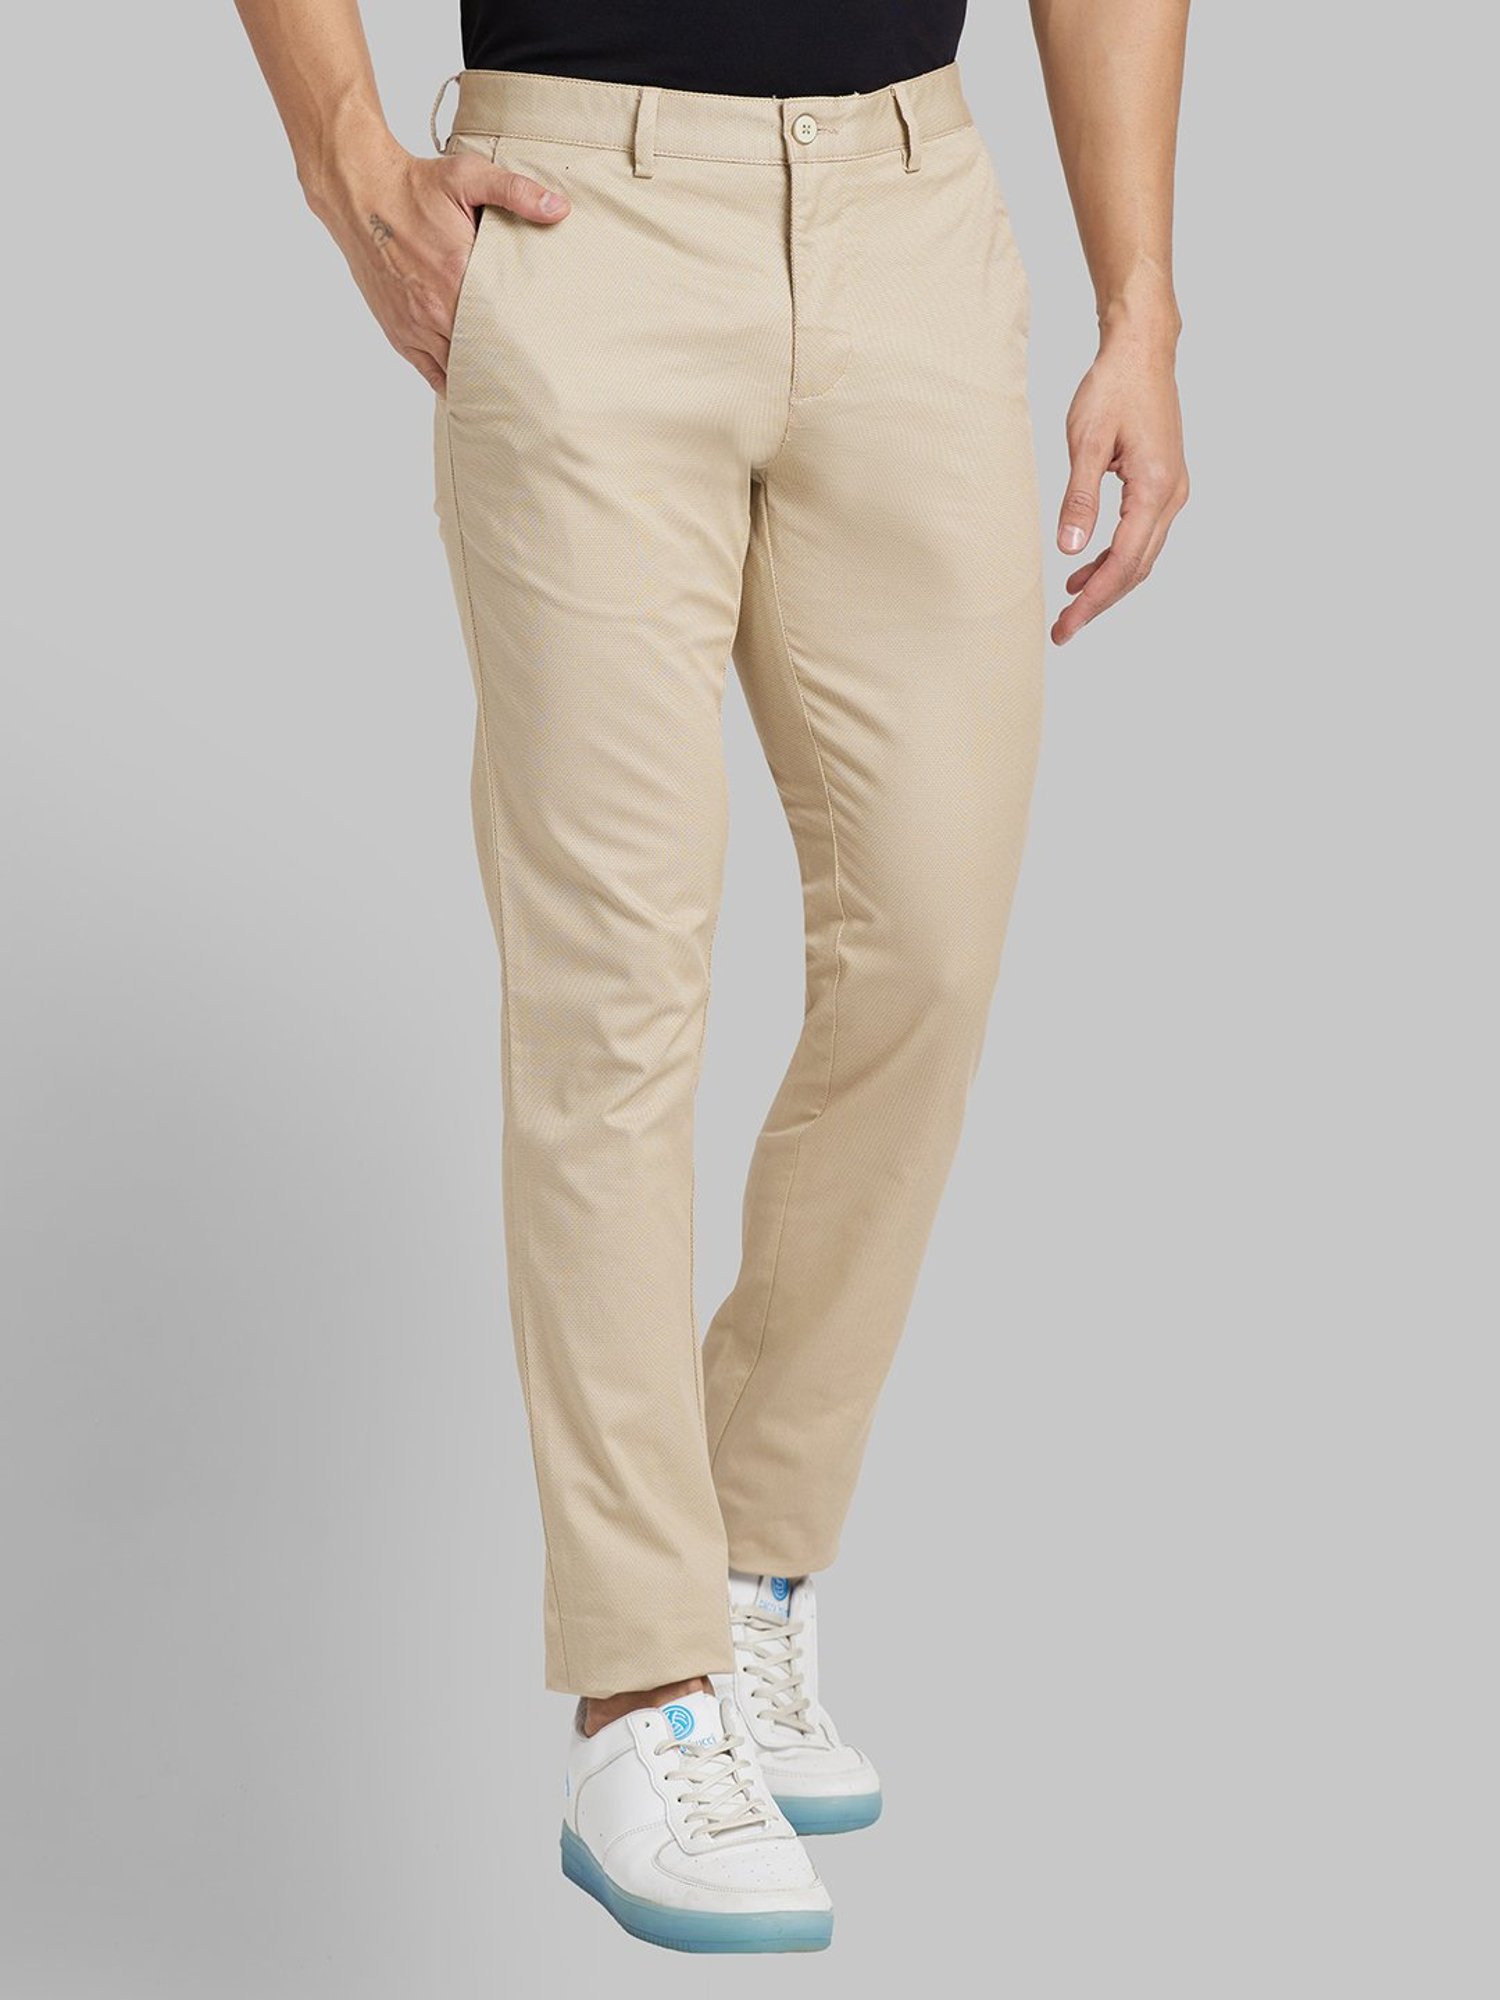 Buy PARK AVENUE Light Khaki Mens Extra Slim Fit Solid Formal Trousers   Shoppers Stop